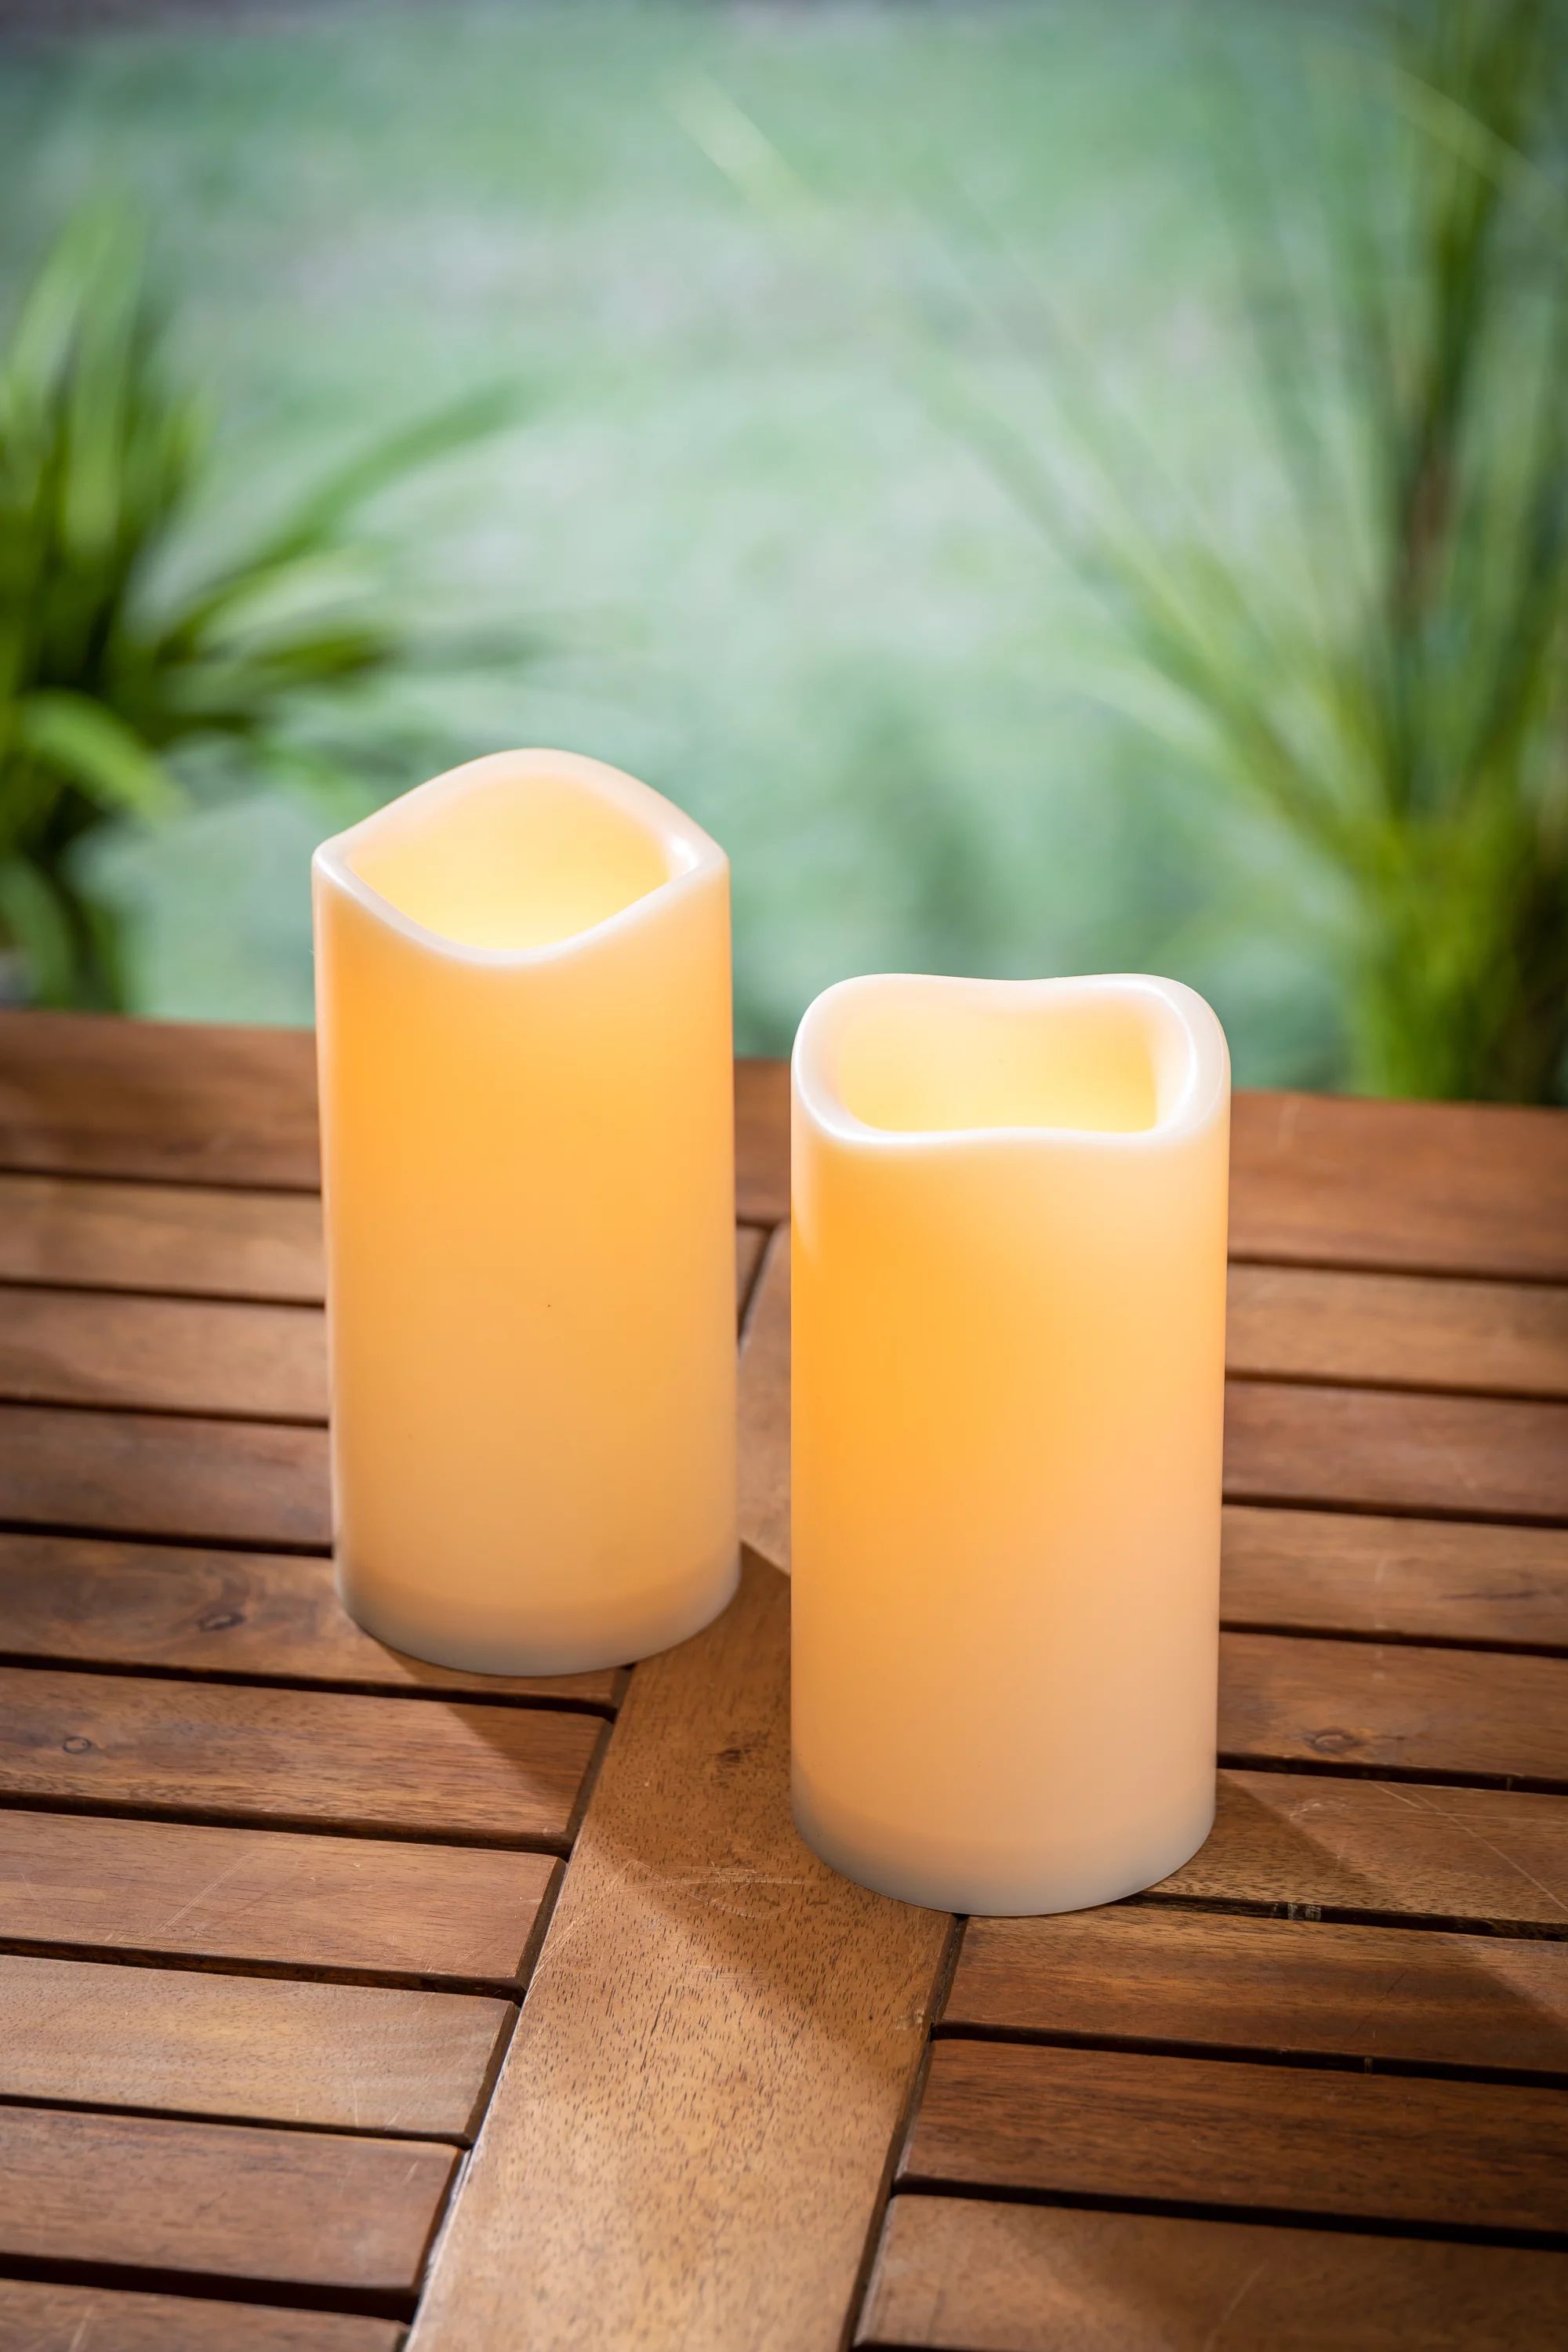 Better Homes & Gardens 6" White Flameless Flicker Outdoor LED Candle 2-Pack | Walmart (US)